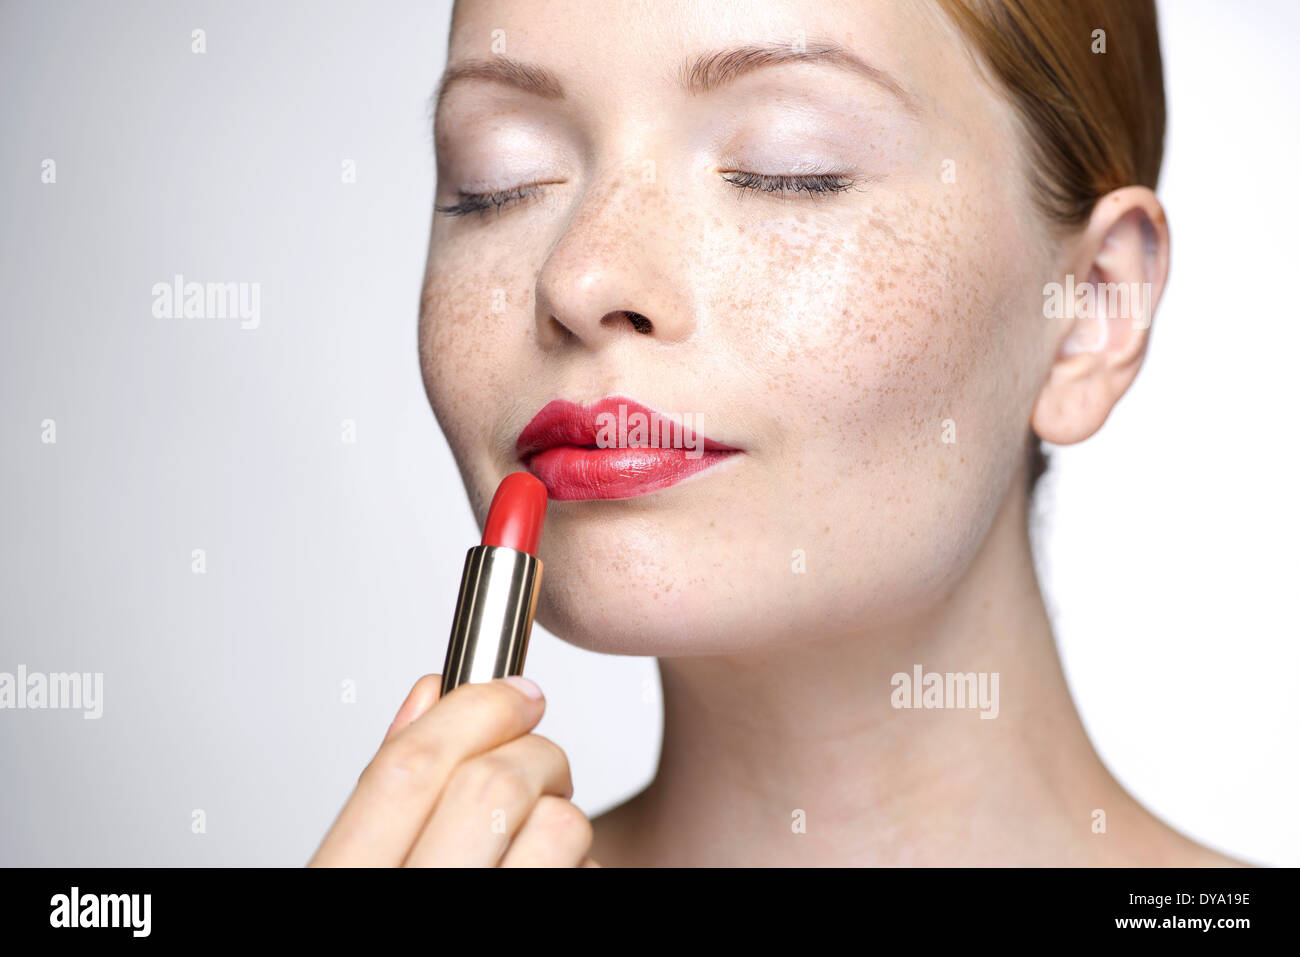 Young woman putting on lipstick Stock Photo